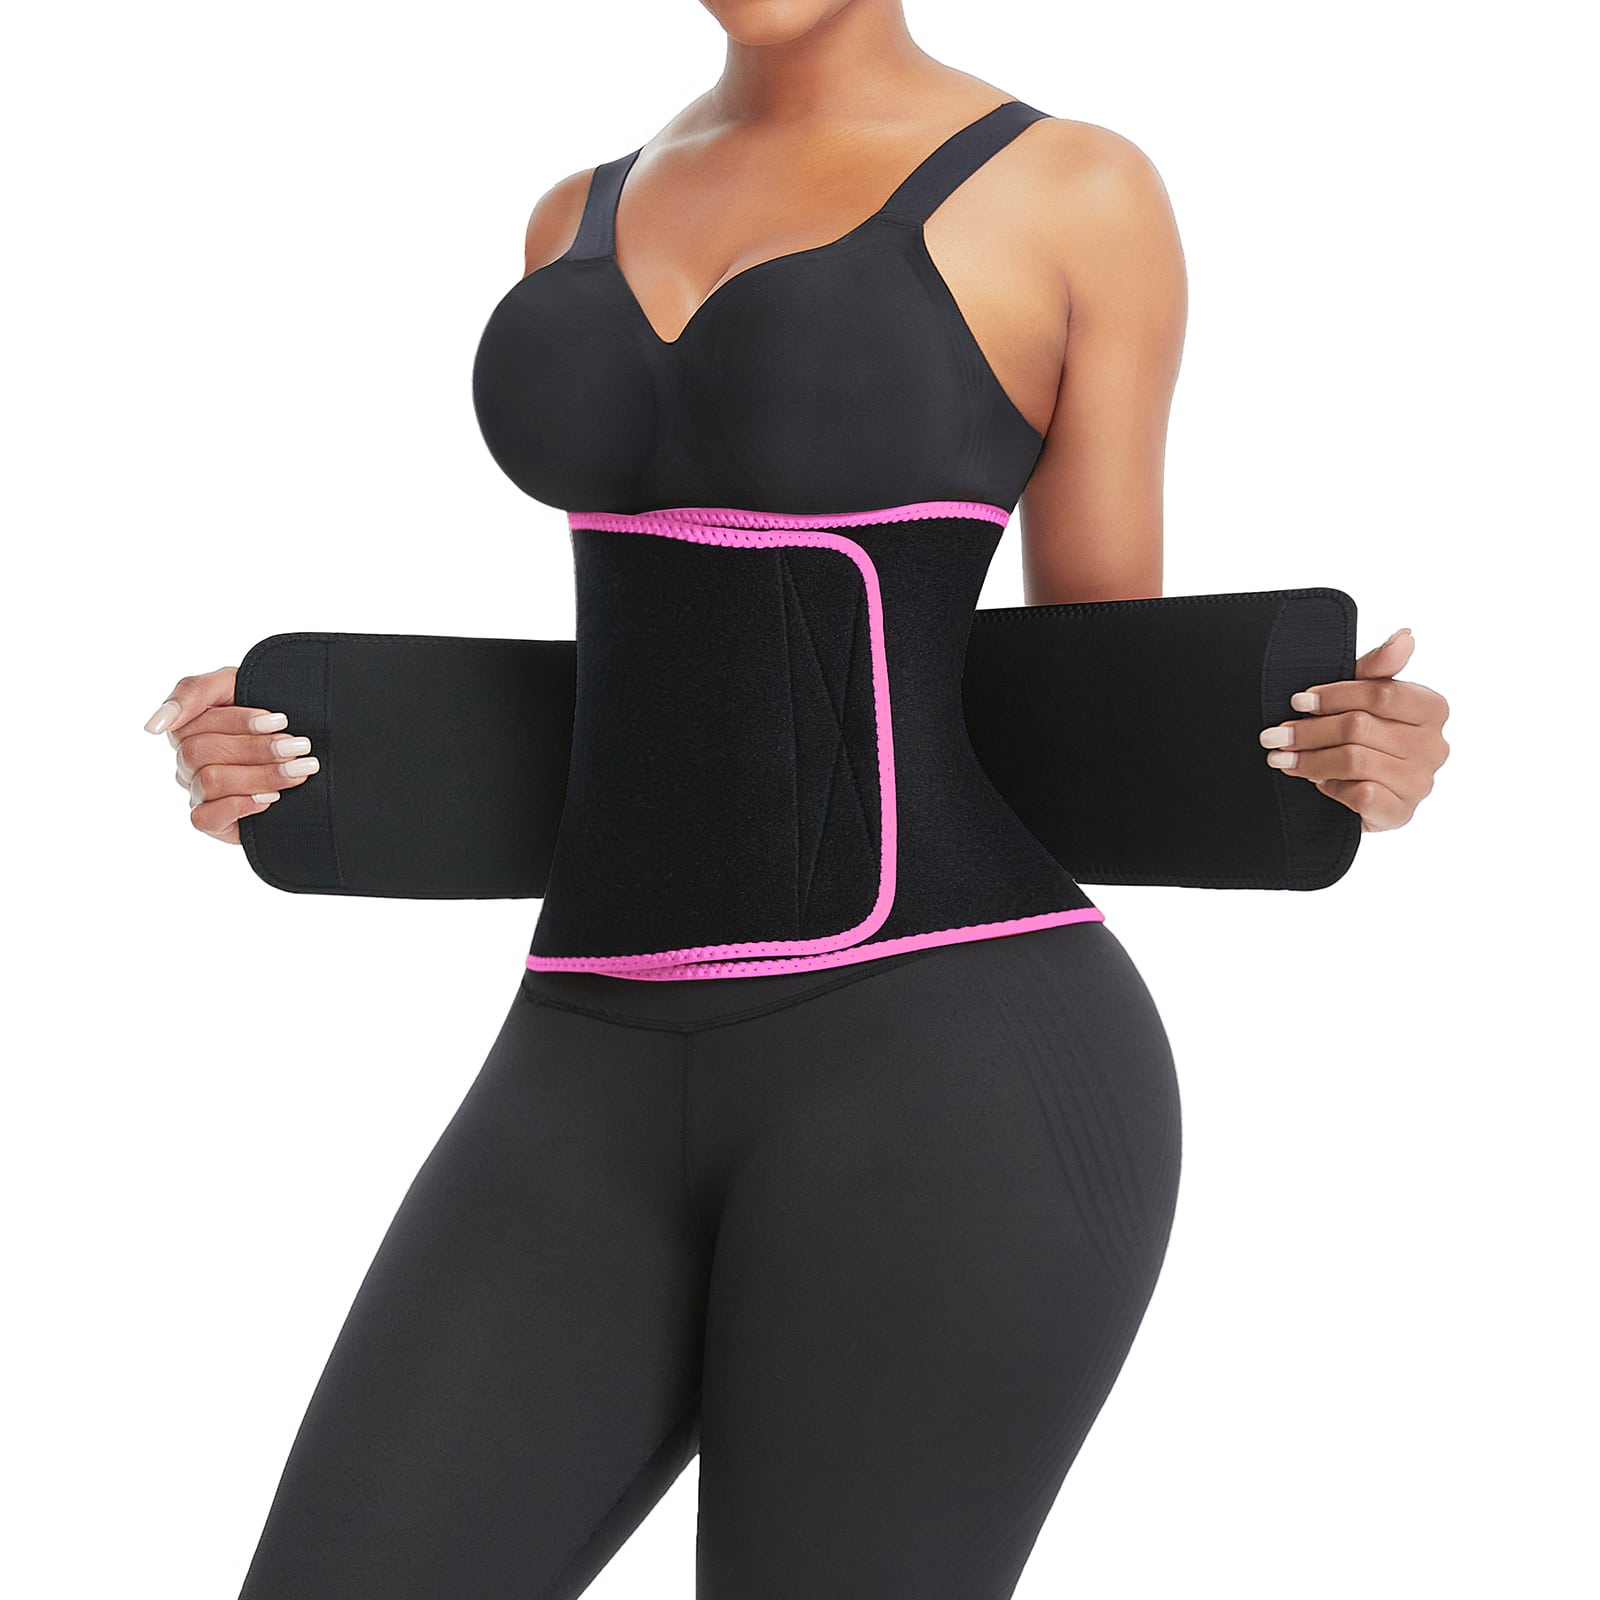 How to see results waist training  Beyfitactive Body Waist Trainer #shorts  #waisttrainer 